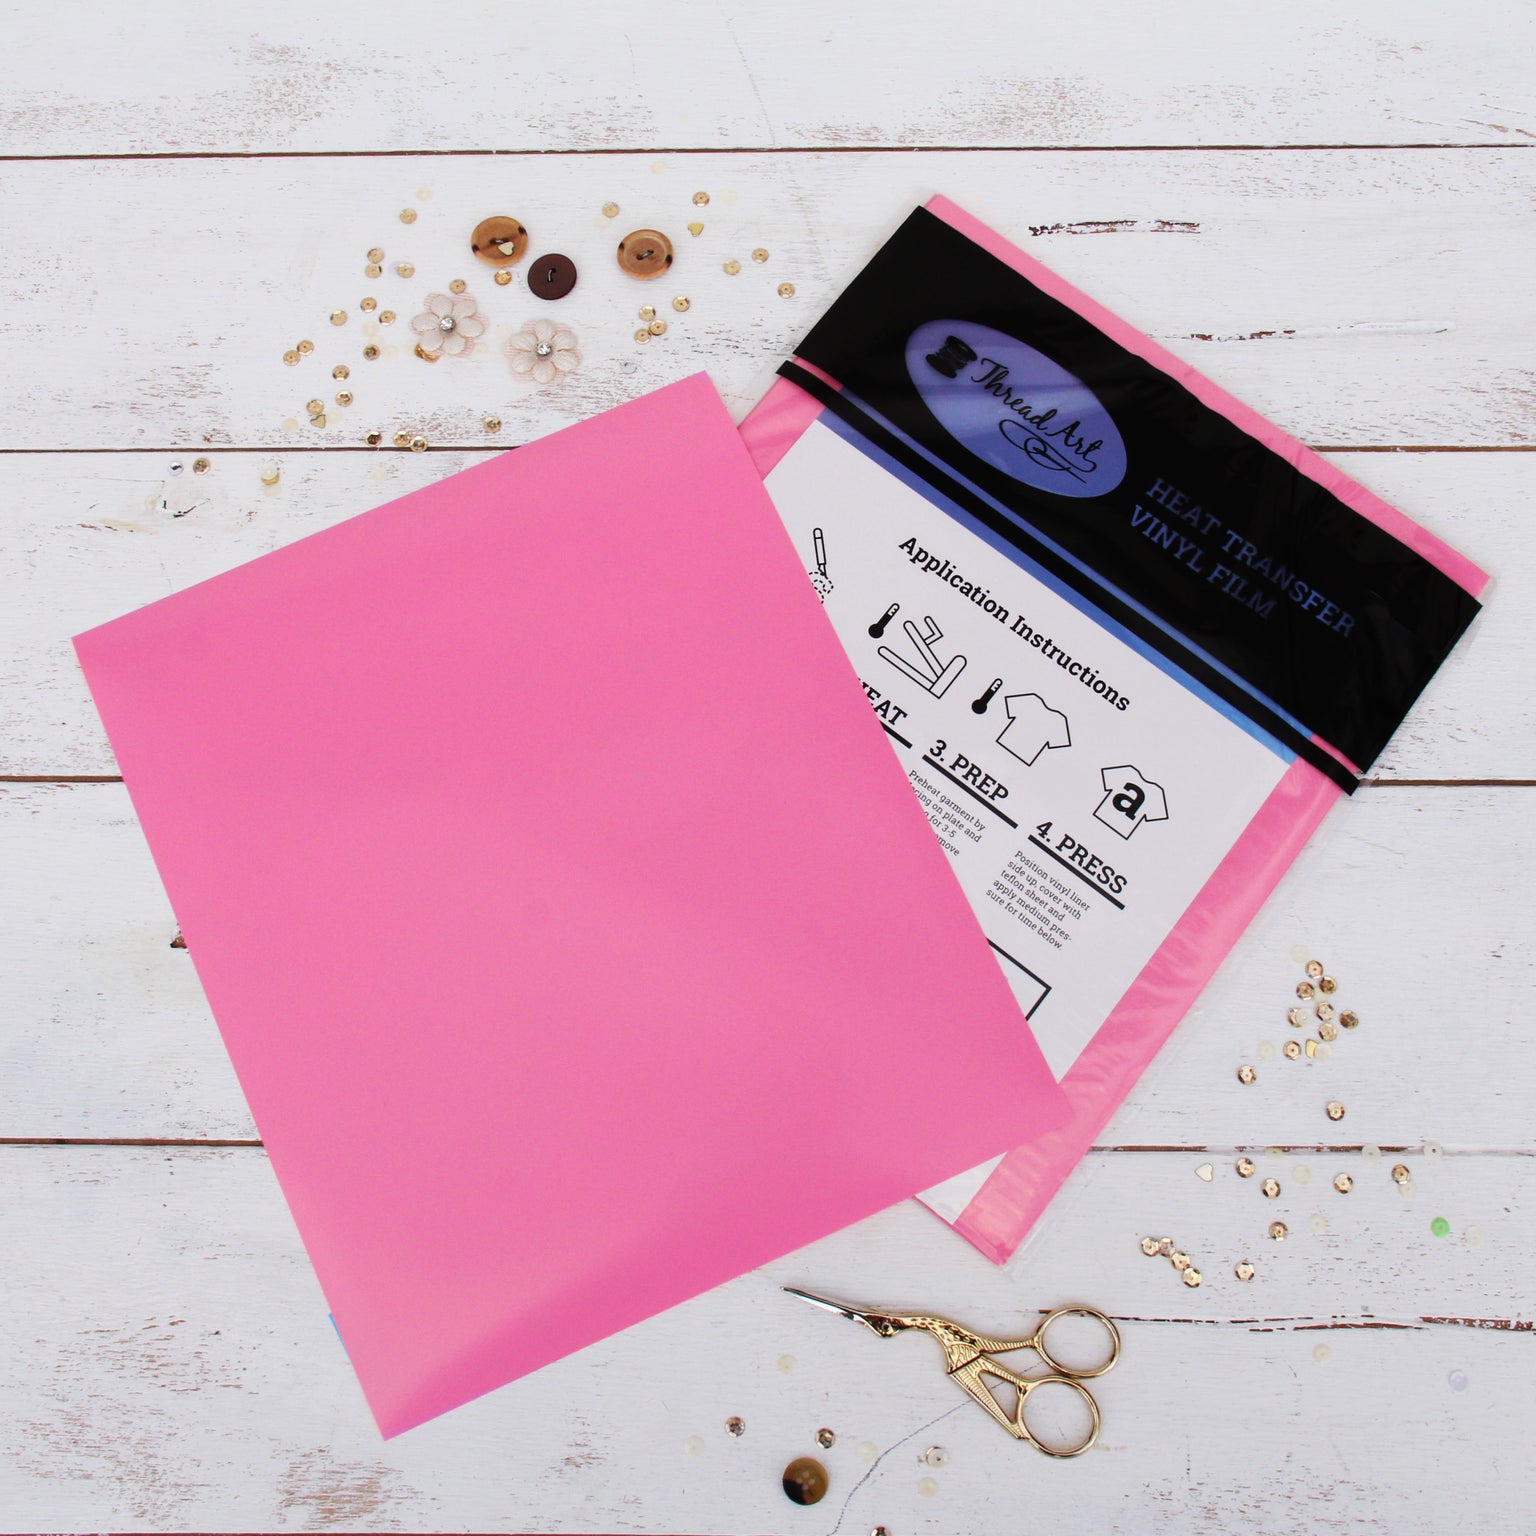 Heat Transfer Vinyl Sheet Packs - Solid and Glitter Finishes - Wide ...